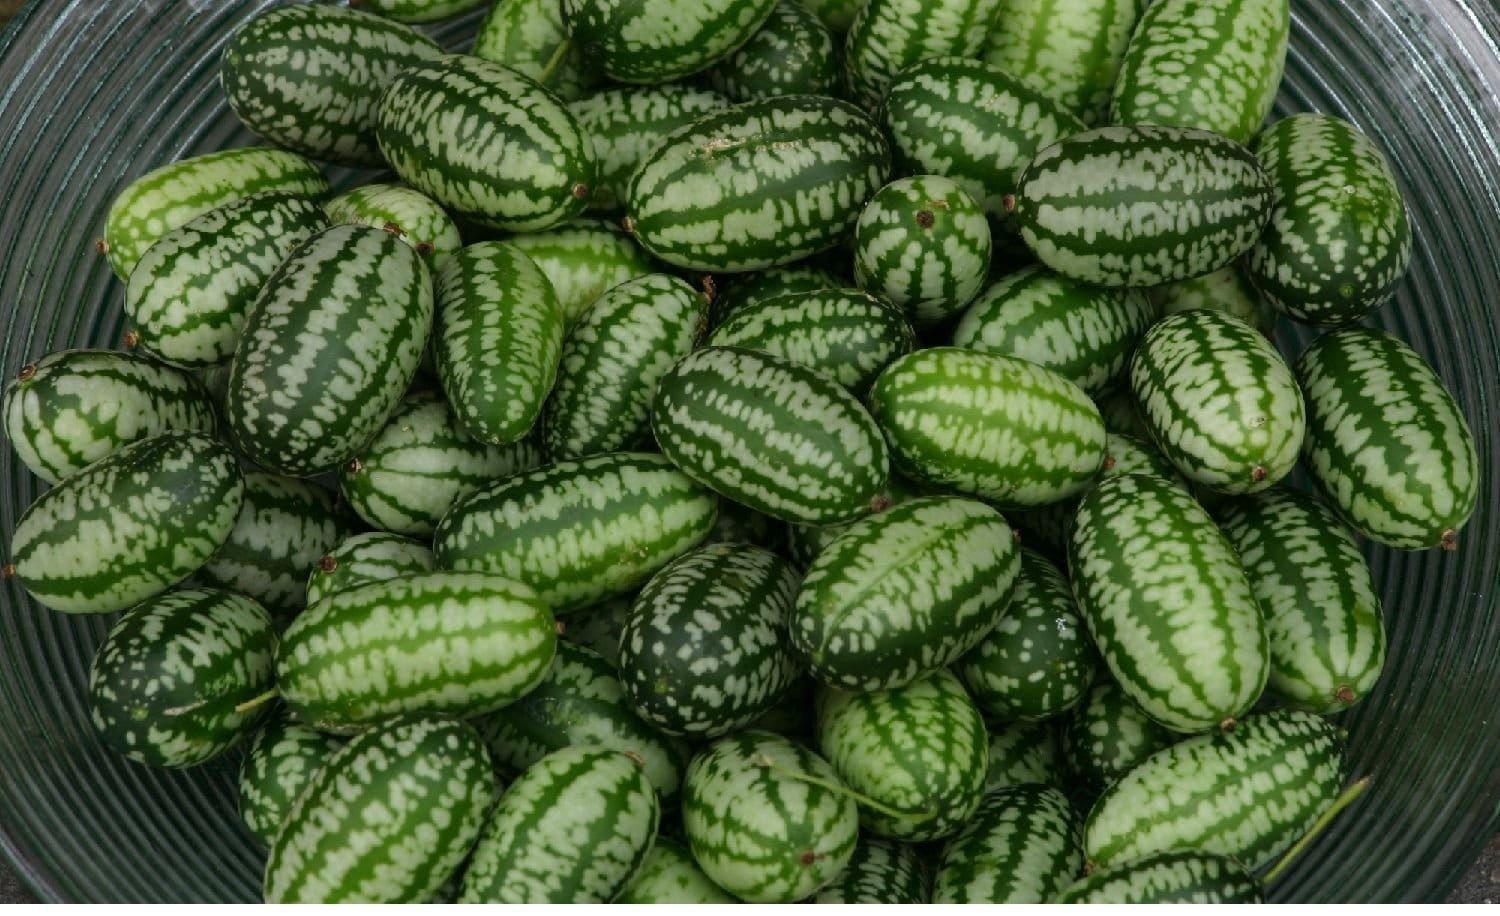 Cucamelon Seeds For Planting (Melothria scobra) - Seed Needs – Seed Needs  LLC